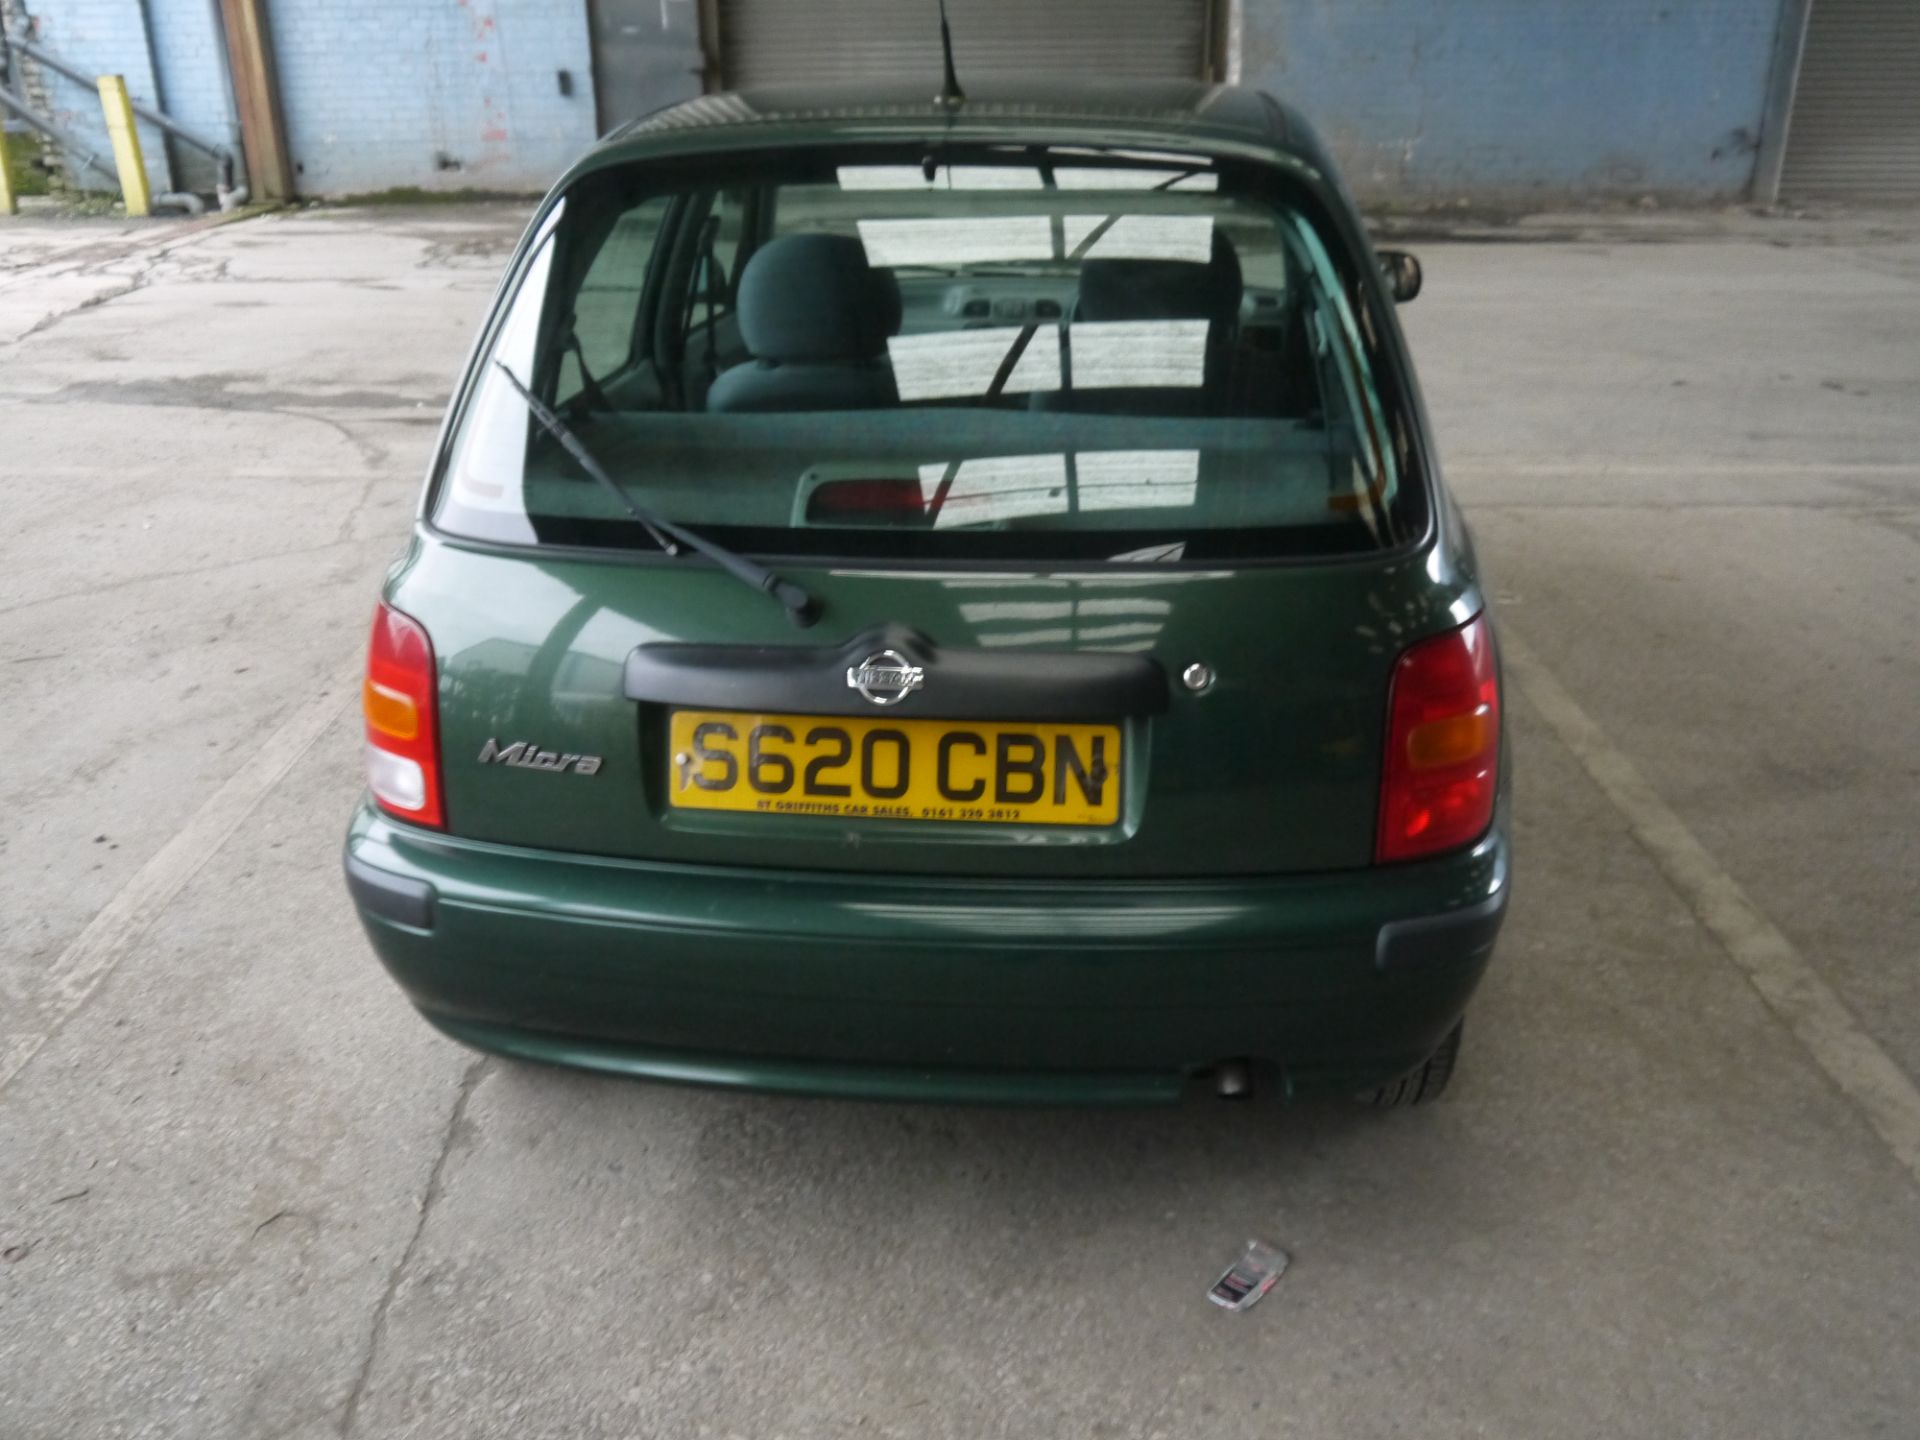 S Reg Nissan Micra, 5 door hatch back, 85,000miles, 1ltr Petrol.  In excellent condition for age. - Image 3 of 8